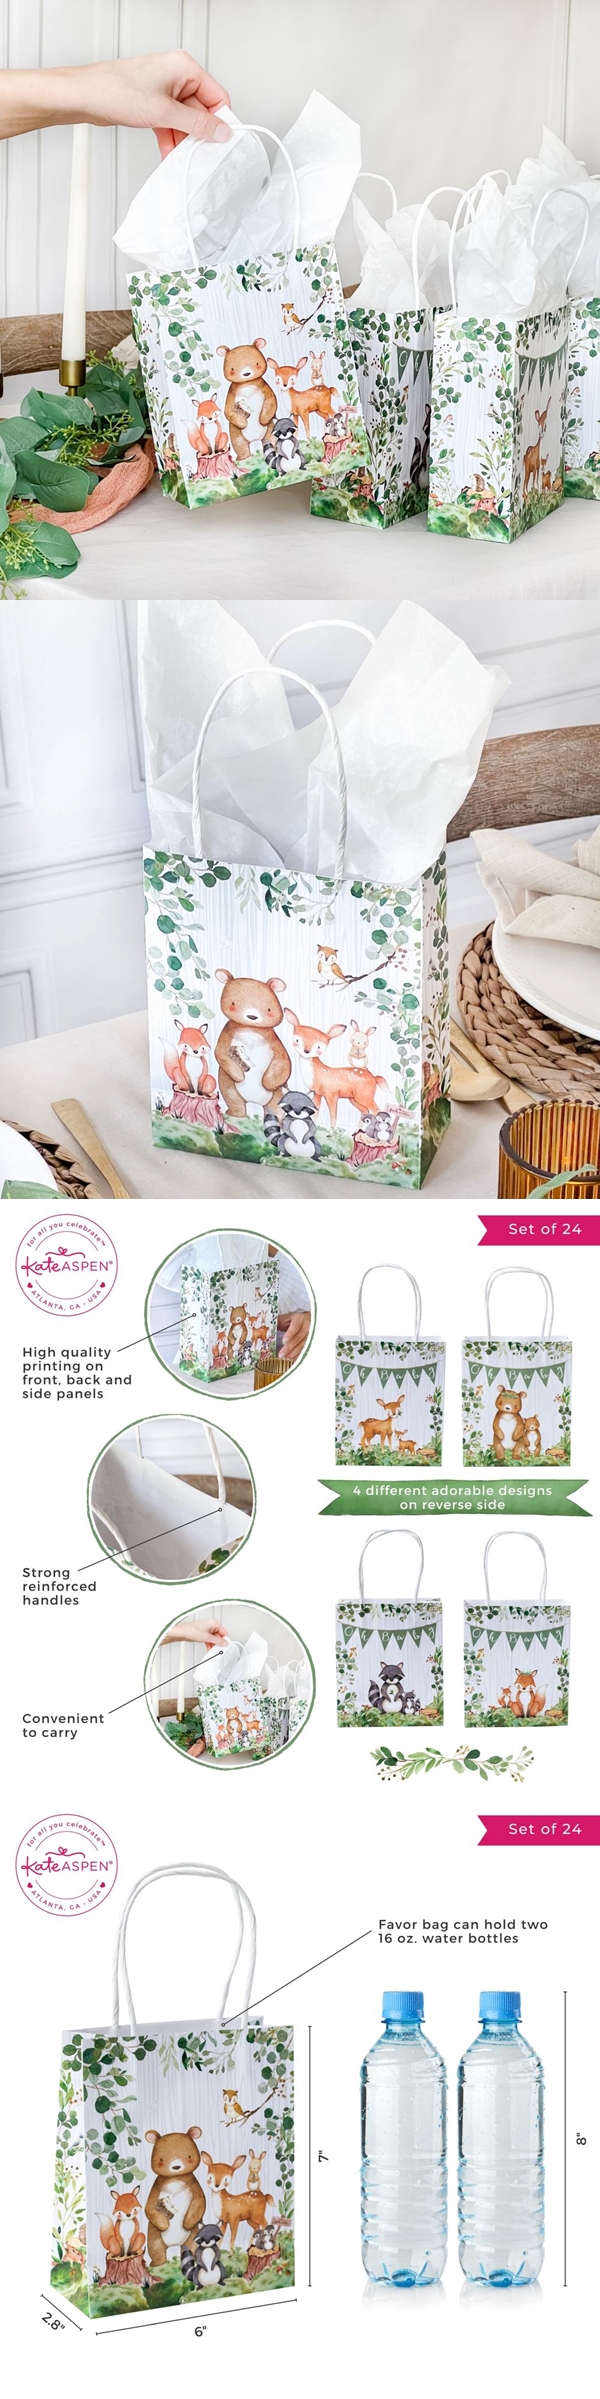 Kate Aspen 'Oh Baby' Woodland Baby Shower Gift Bags (Set of 24)